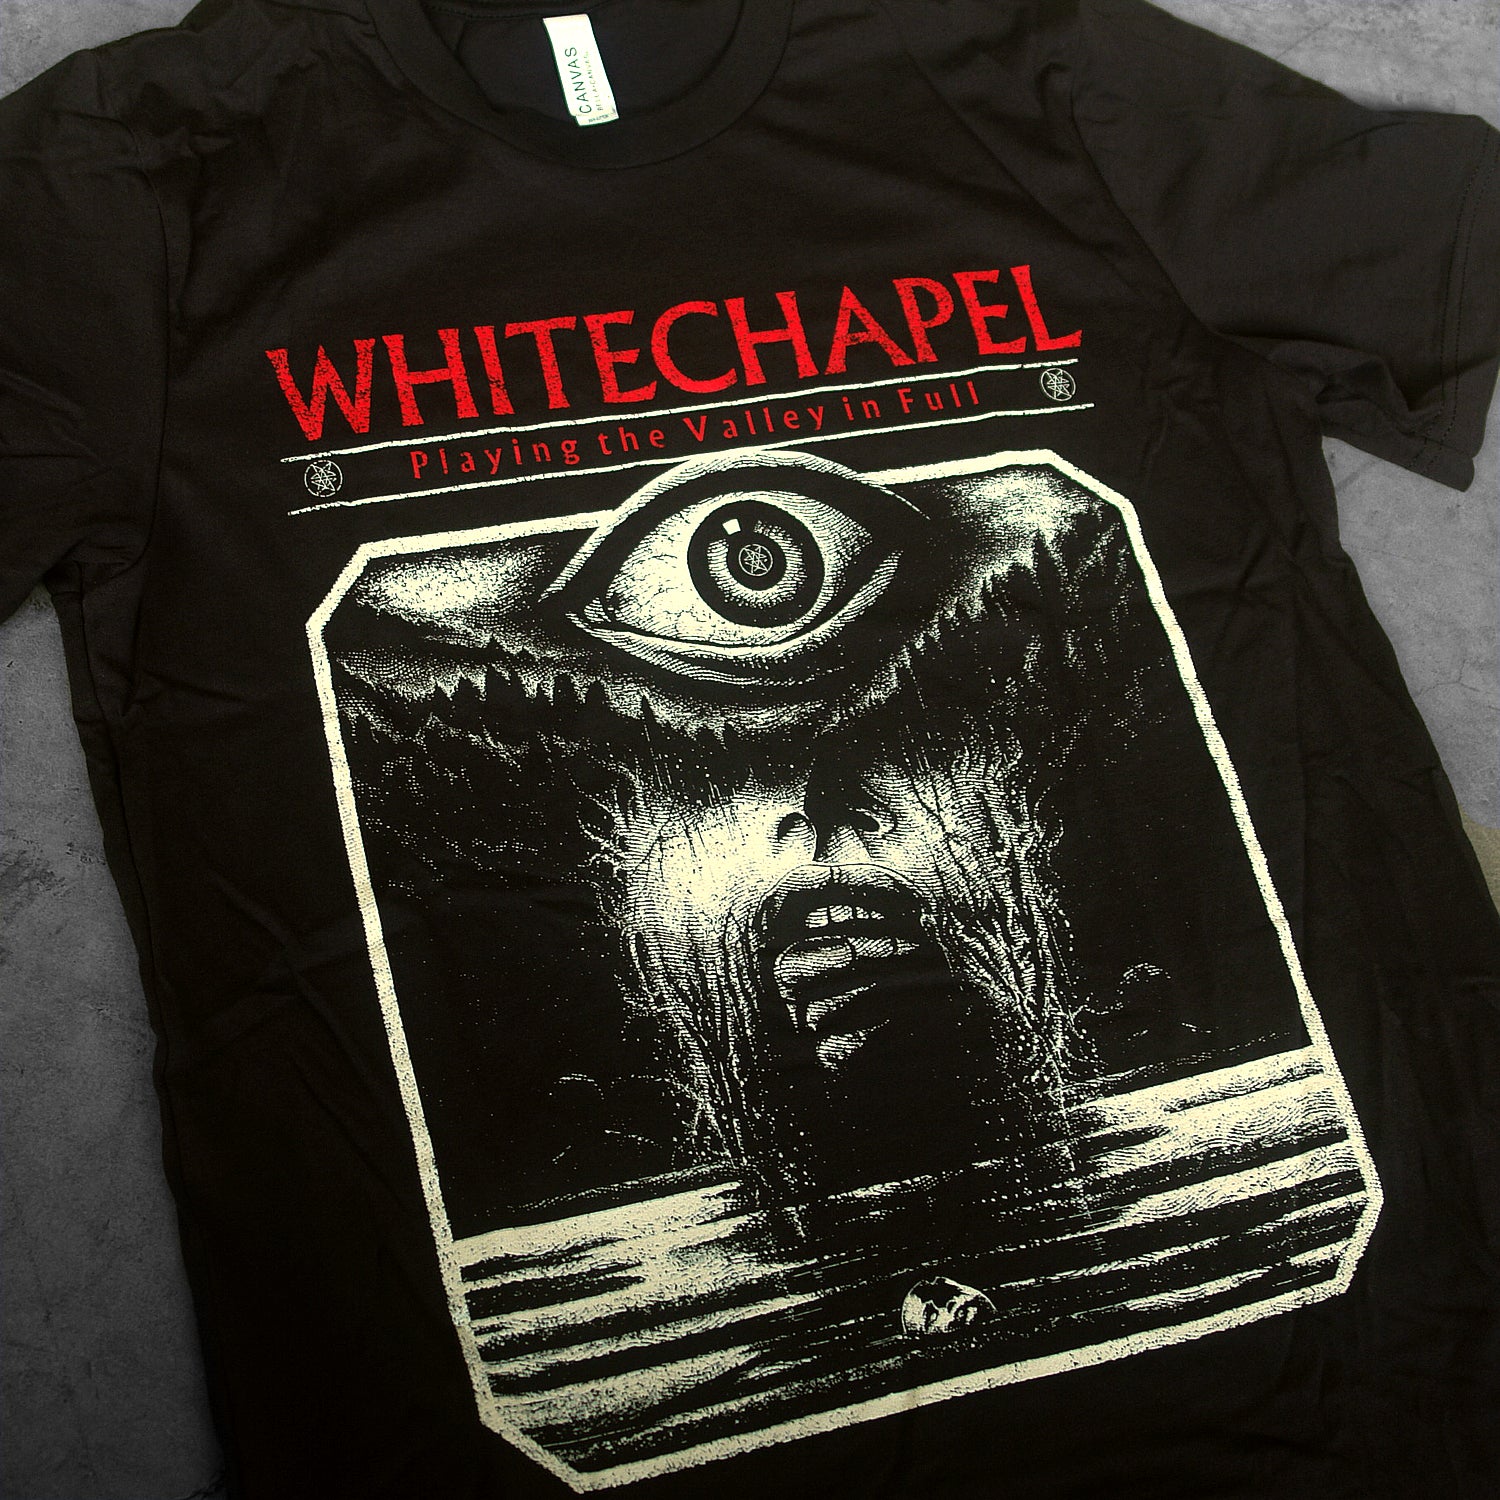 close up, angled image of a black tee shirt laid flat on a concrete floor. tee has full print of an eye coming of out water. at the top in red says whitechapel playing the valley in full